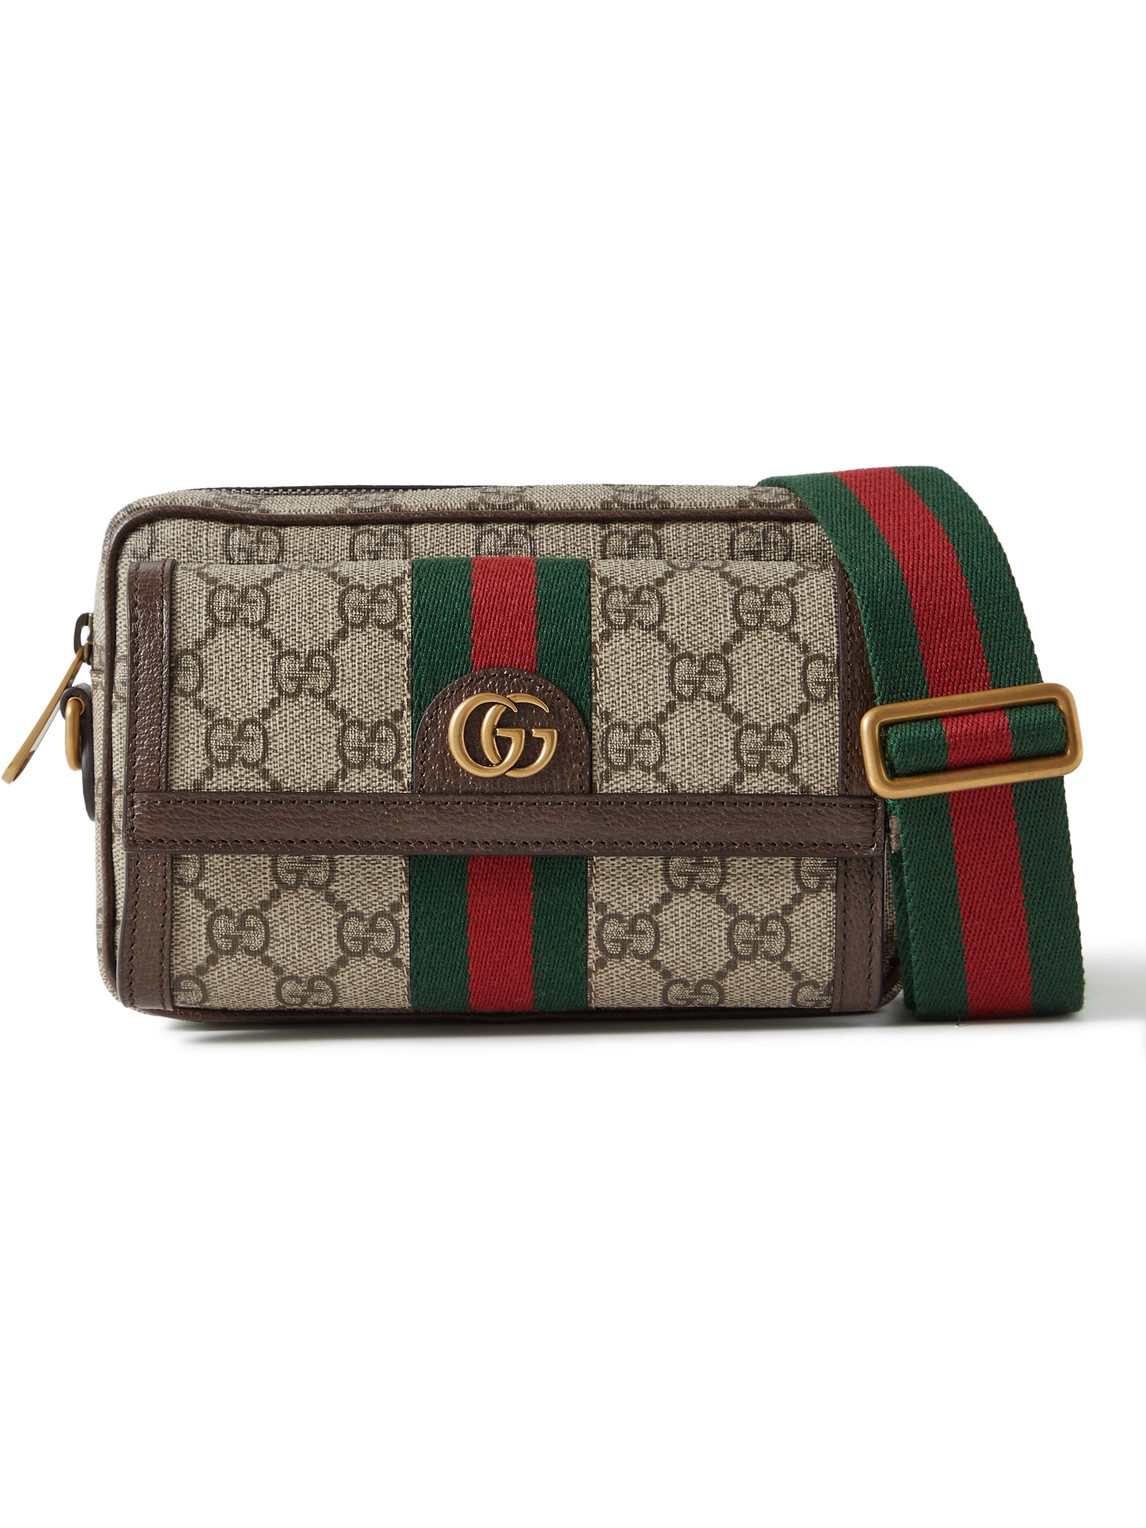 Gucci - Ophidia Mini Leather-Trimmed Monogrammed Coated-Canvas